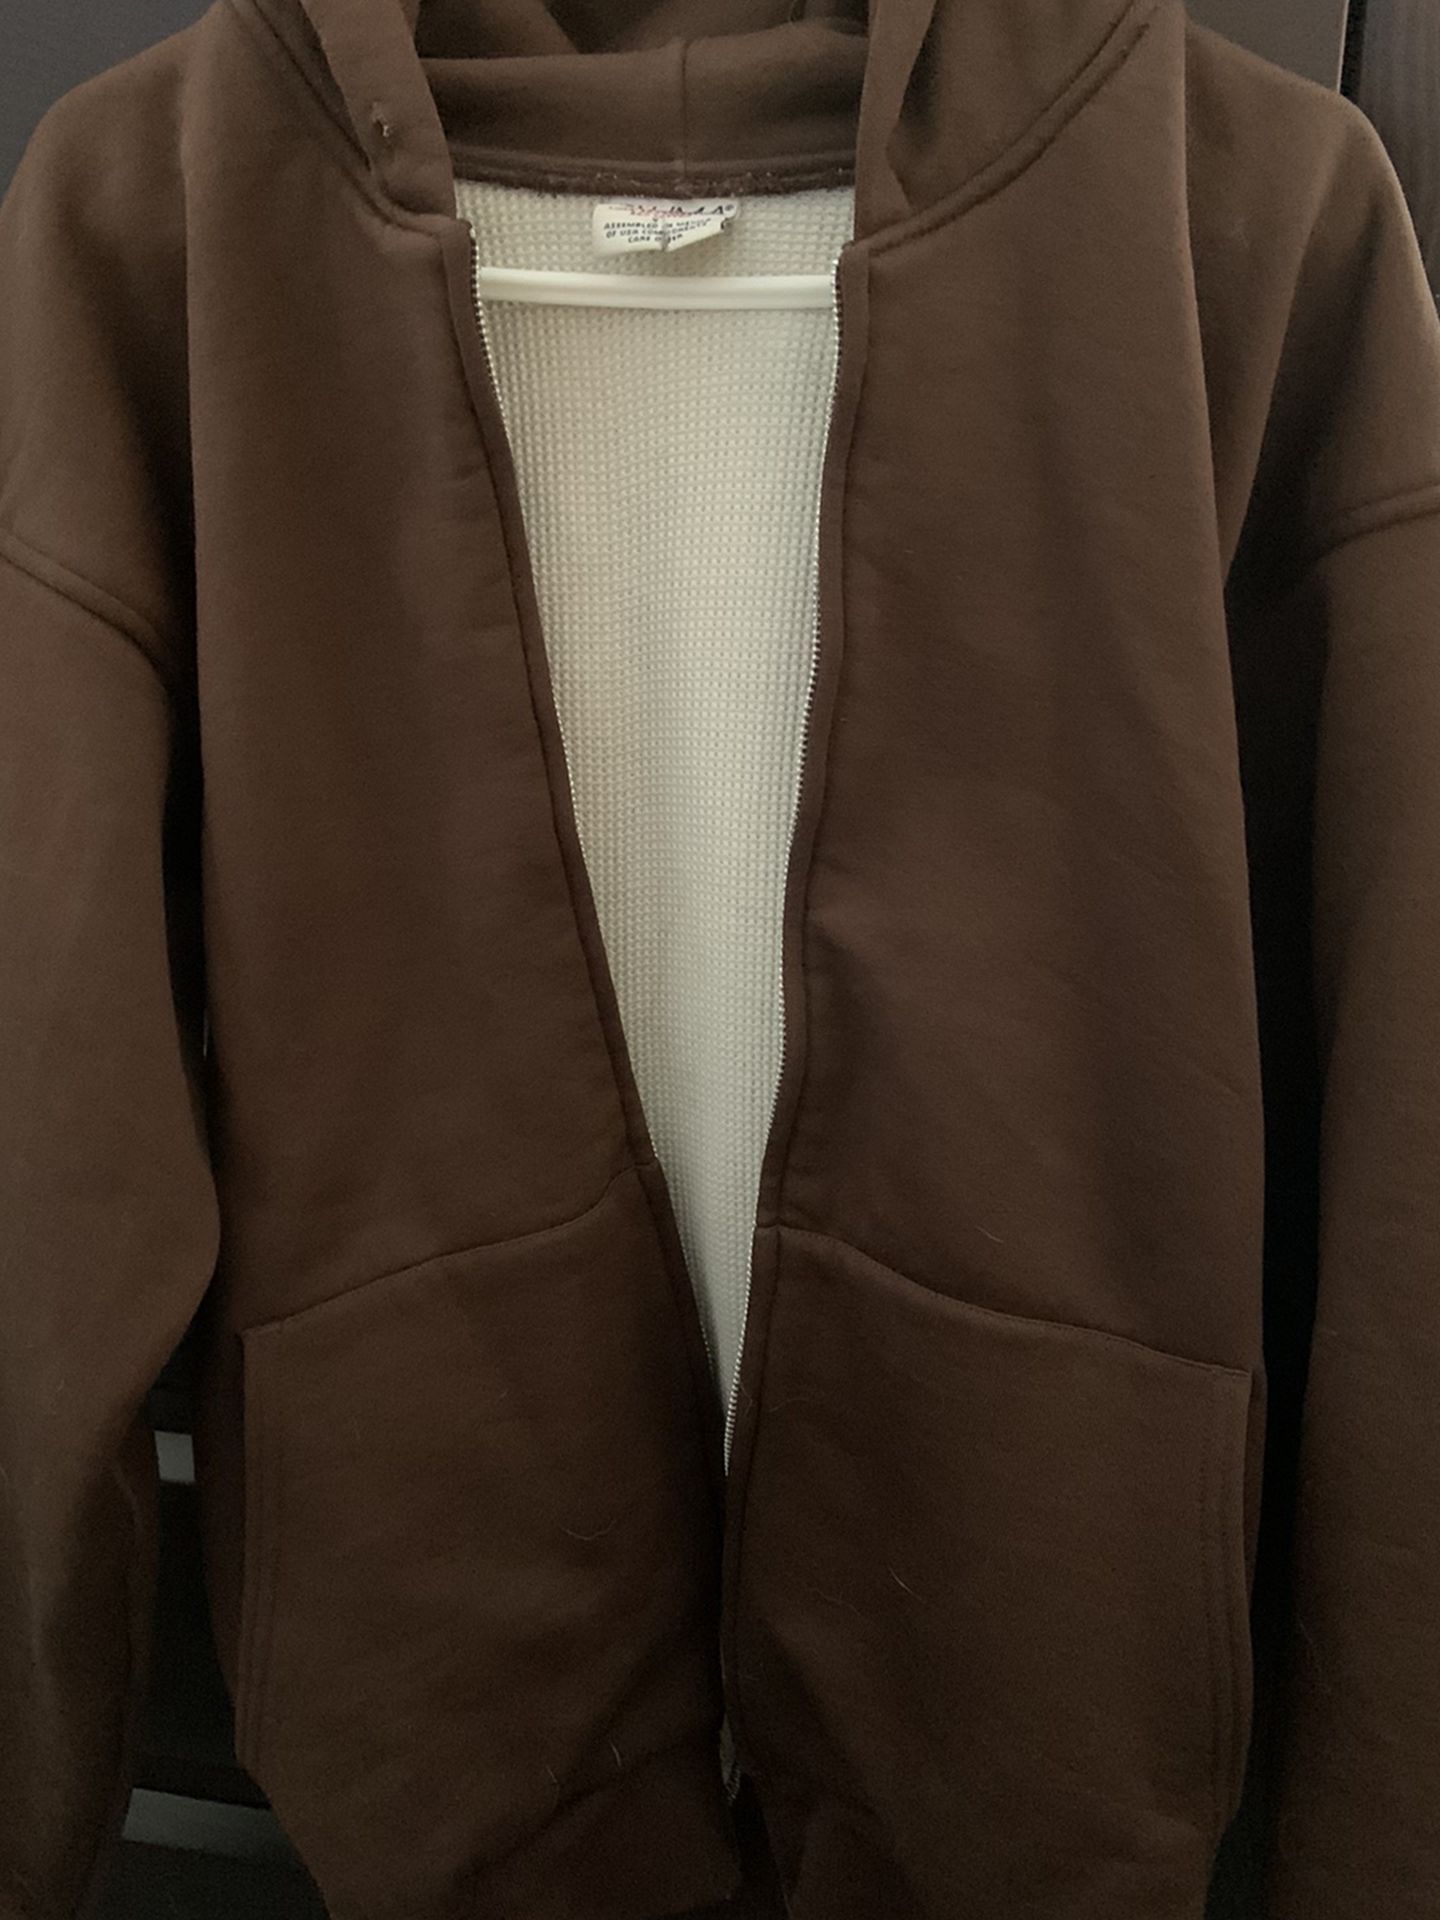 Large Brown Hooded Sweater